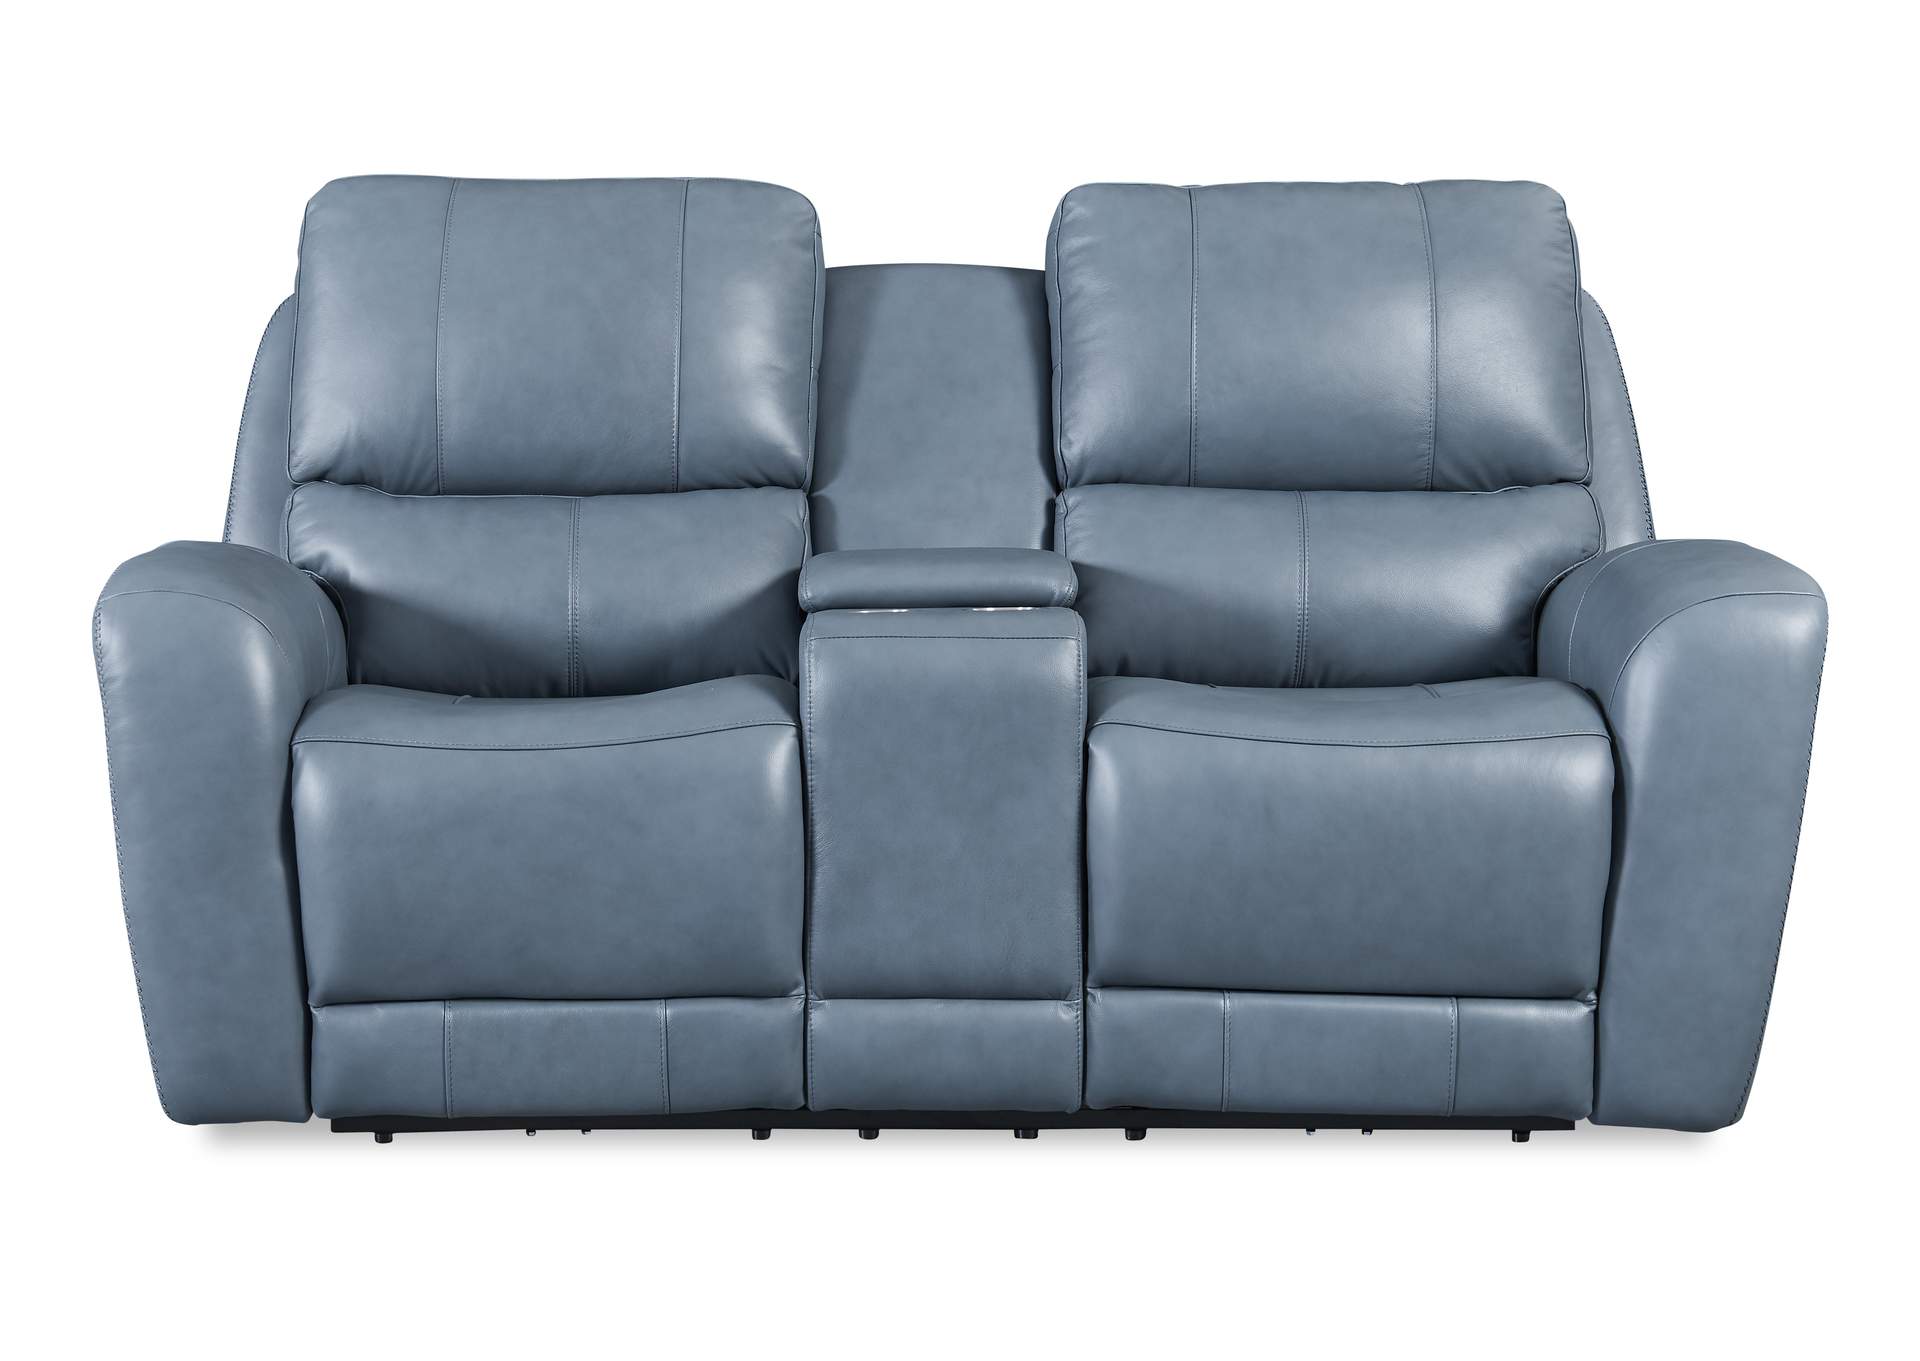 Cambria Eh295 Bel Air P2 Console Loveseat 6027Lv Blue,Leather Italia USA